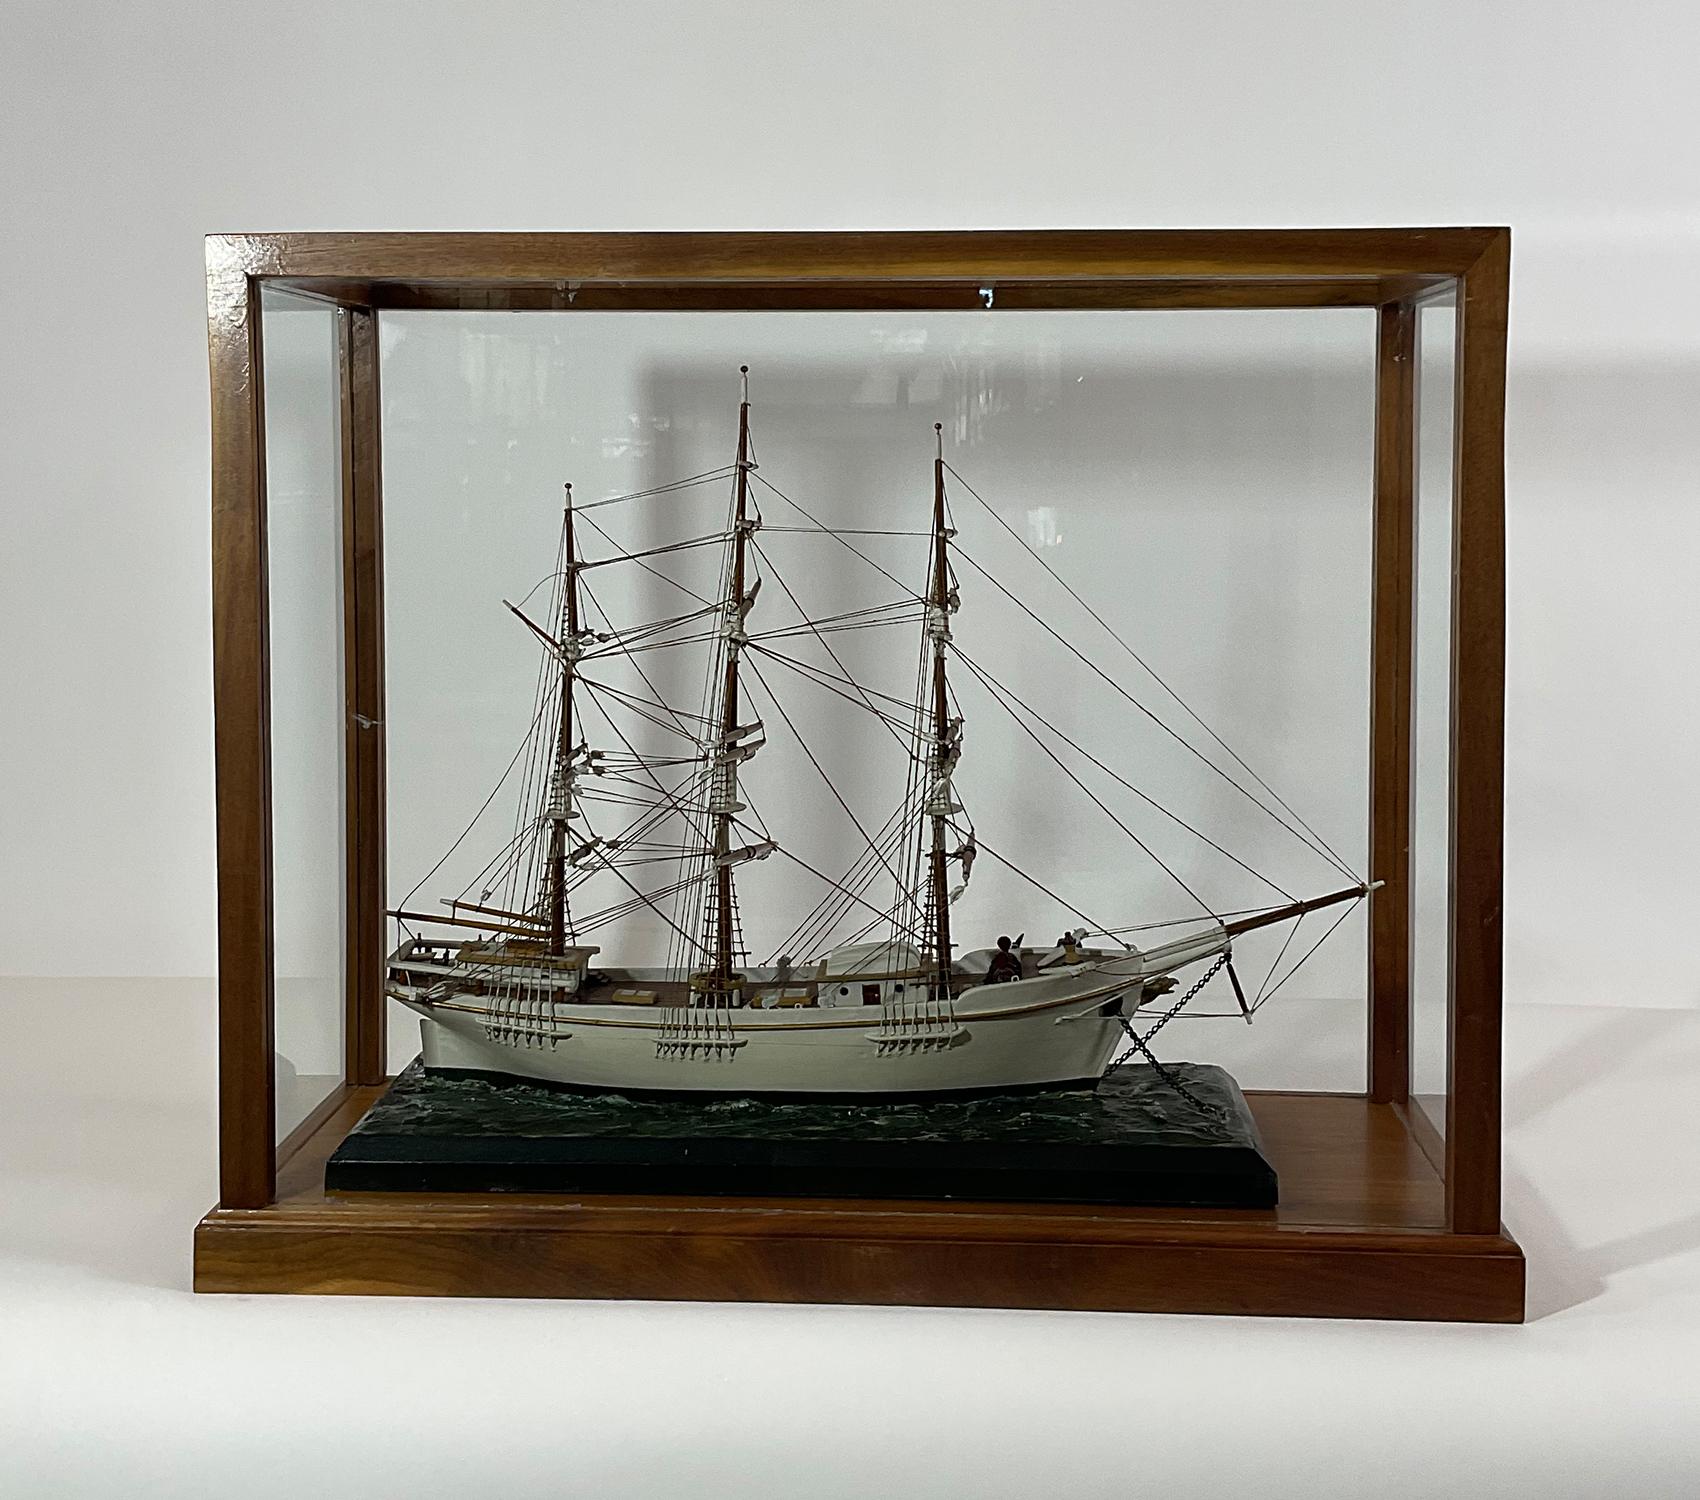 Quality antique model of the square rigger 